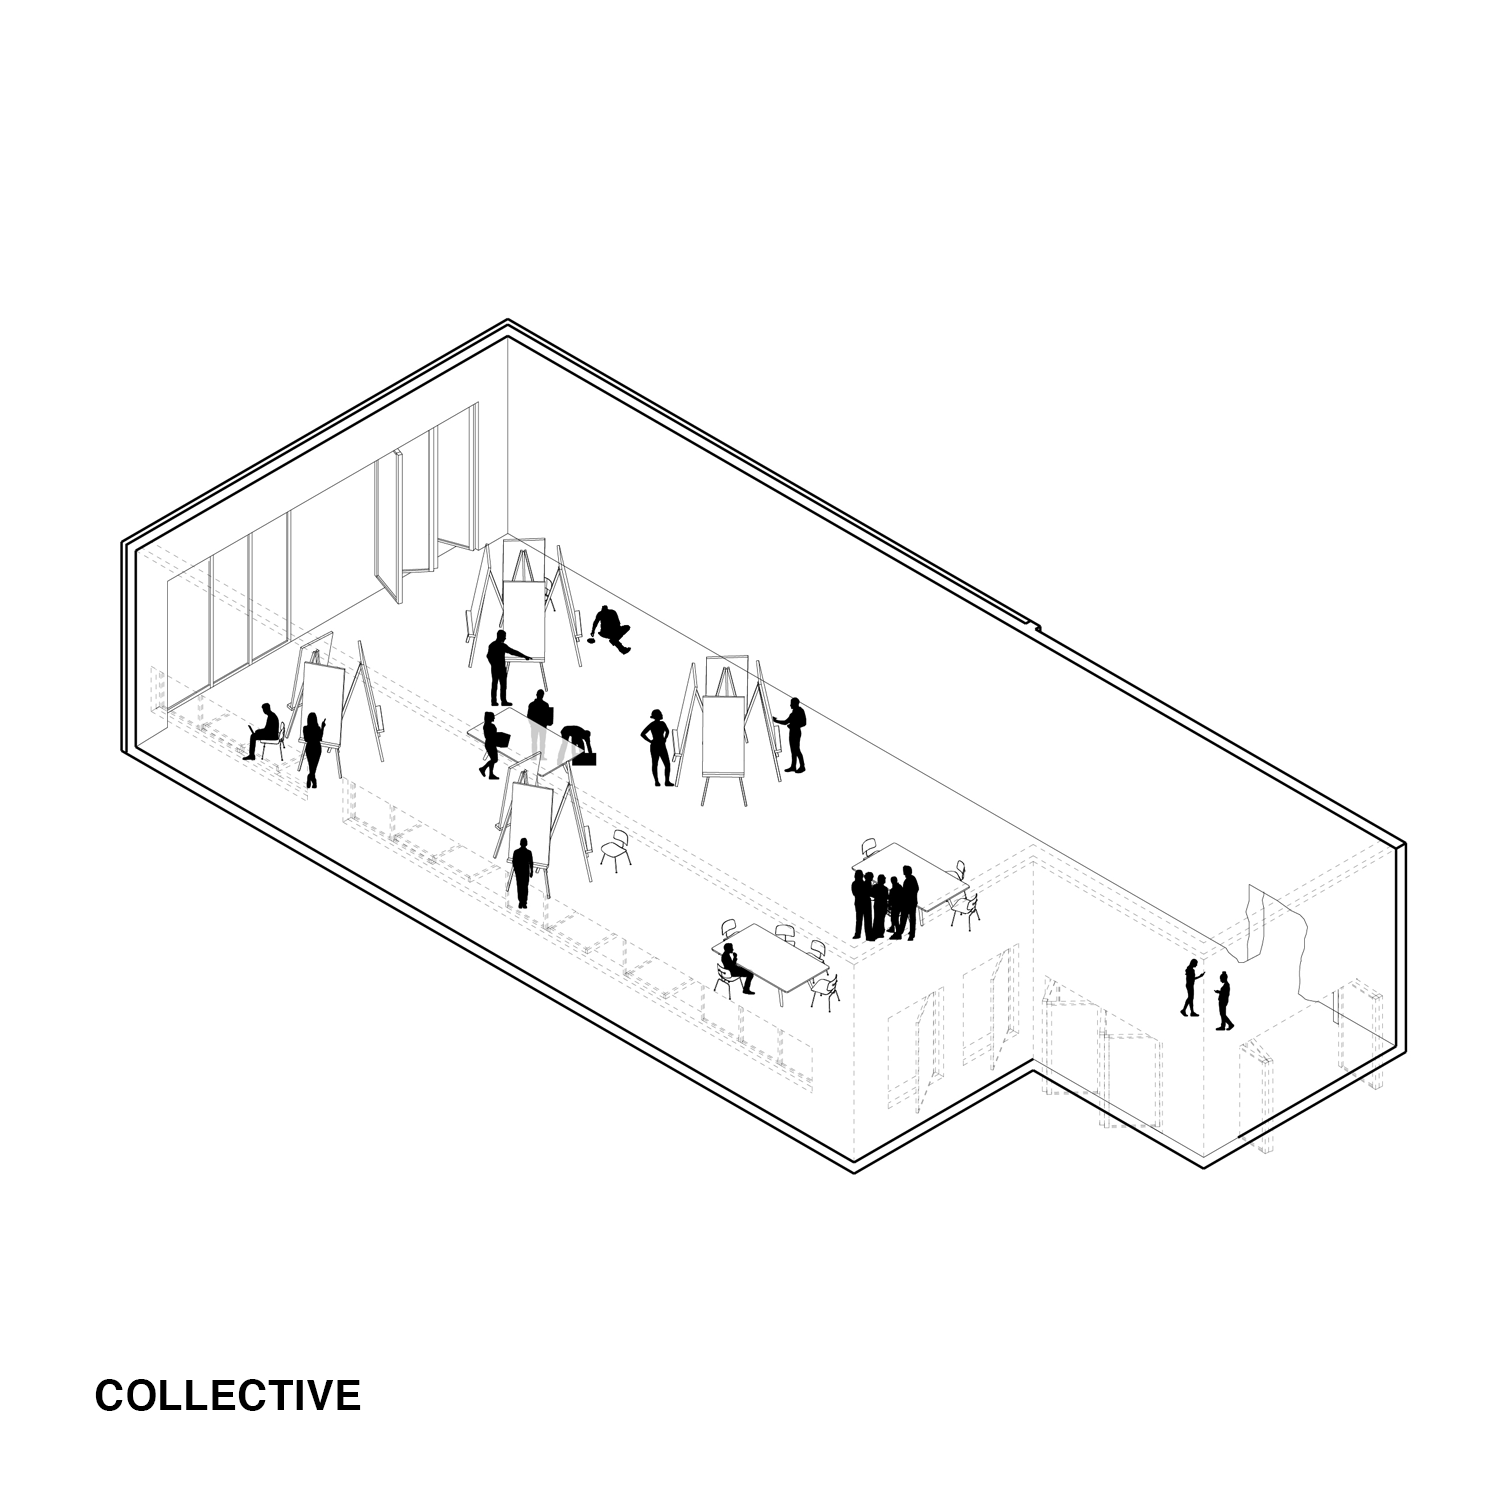 Gif of changing uses in collective space